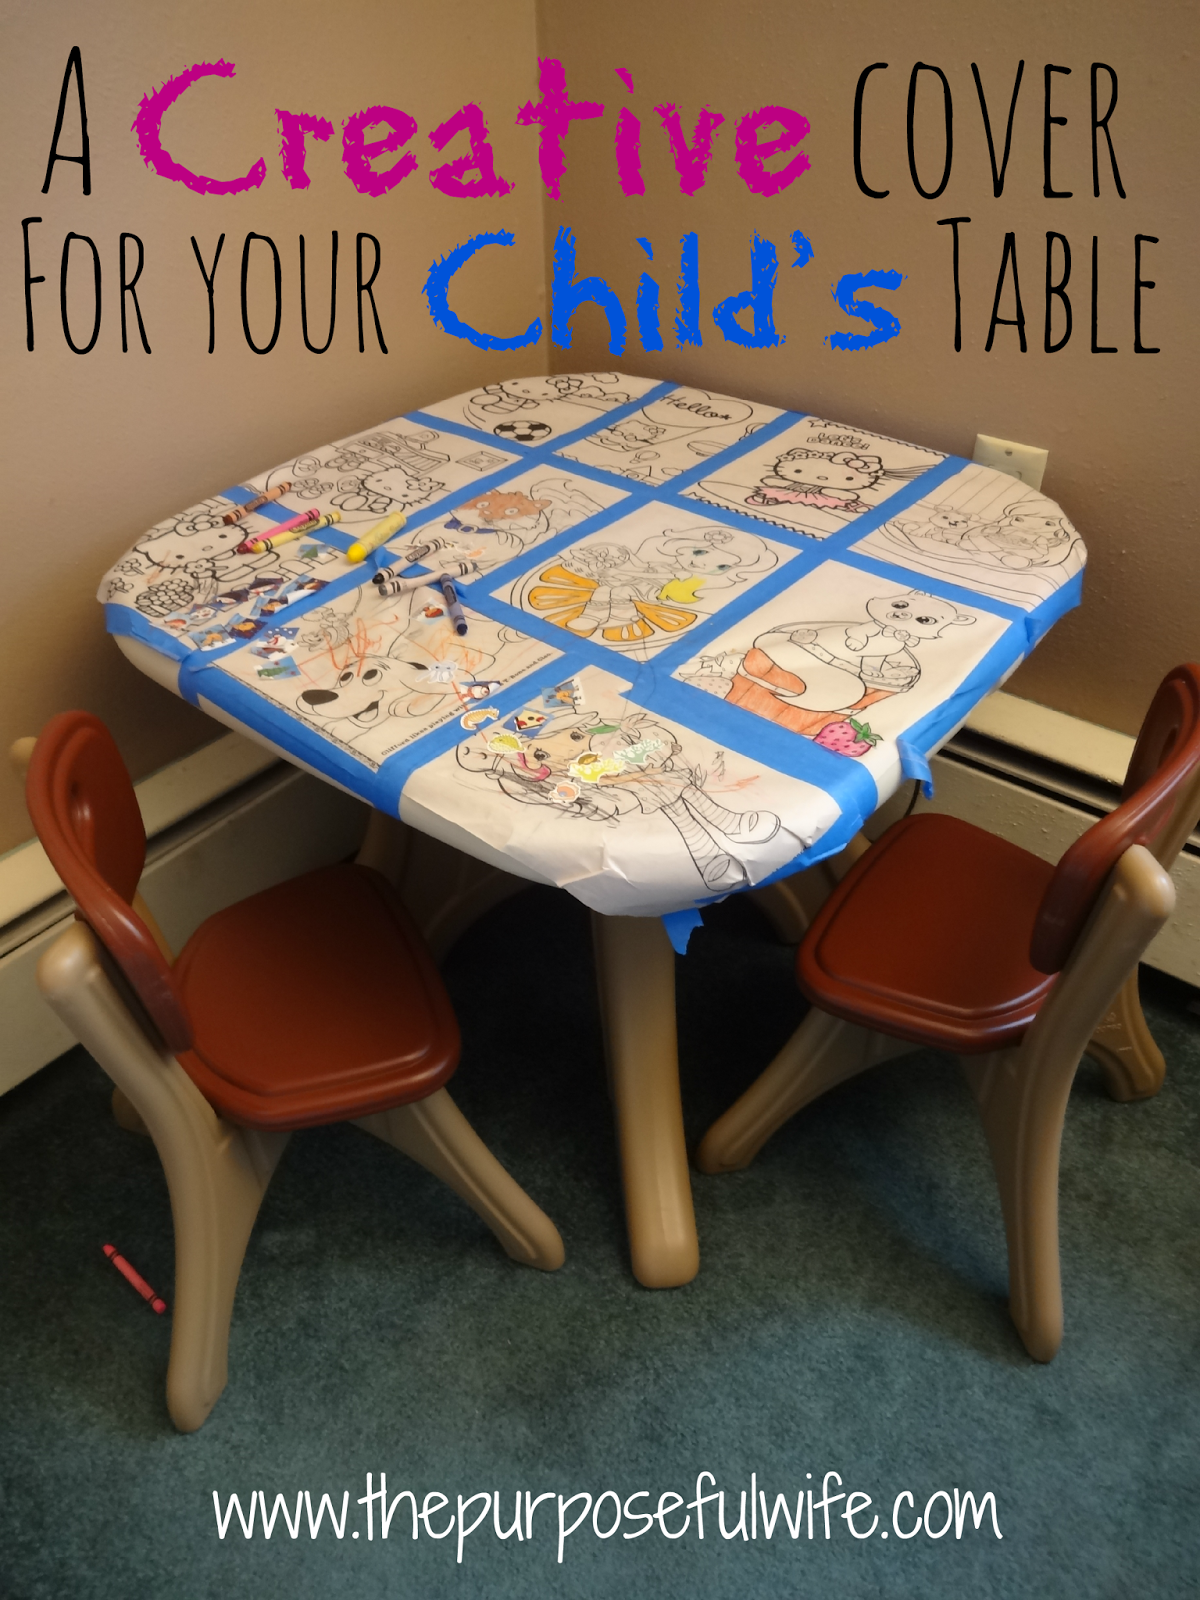 Something that will make your life a little easier and your kiddos lives a little more colorful